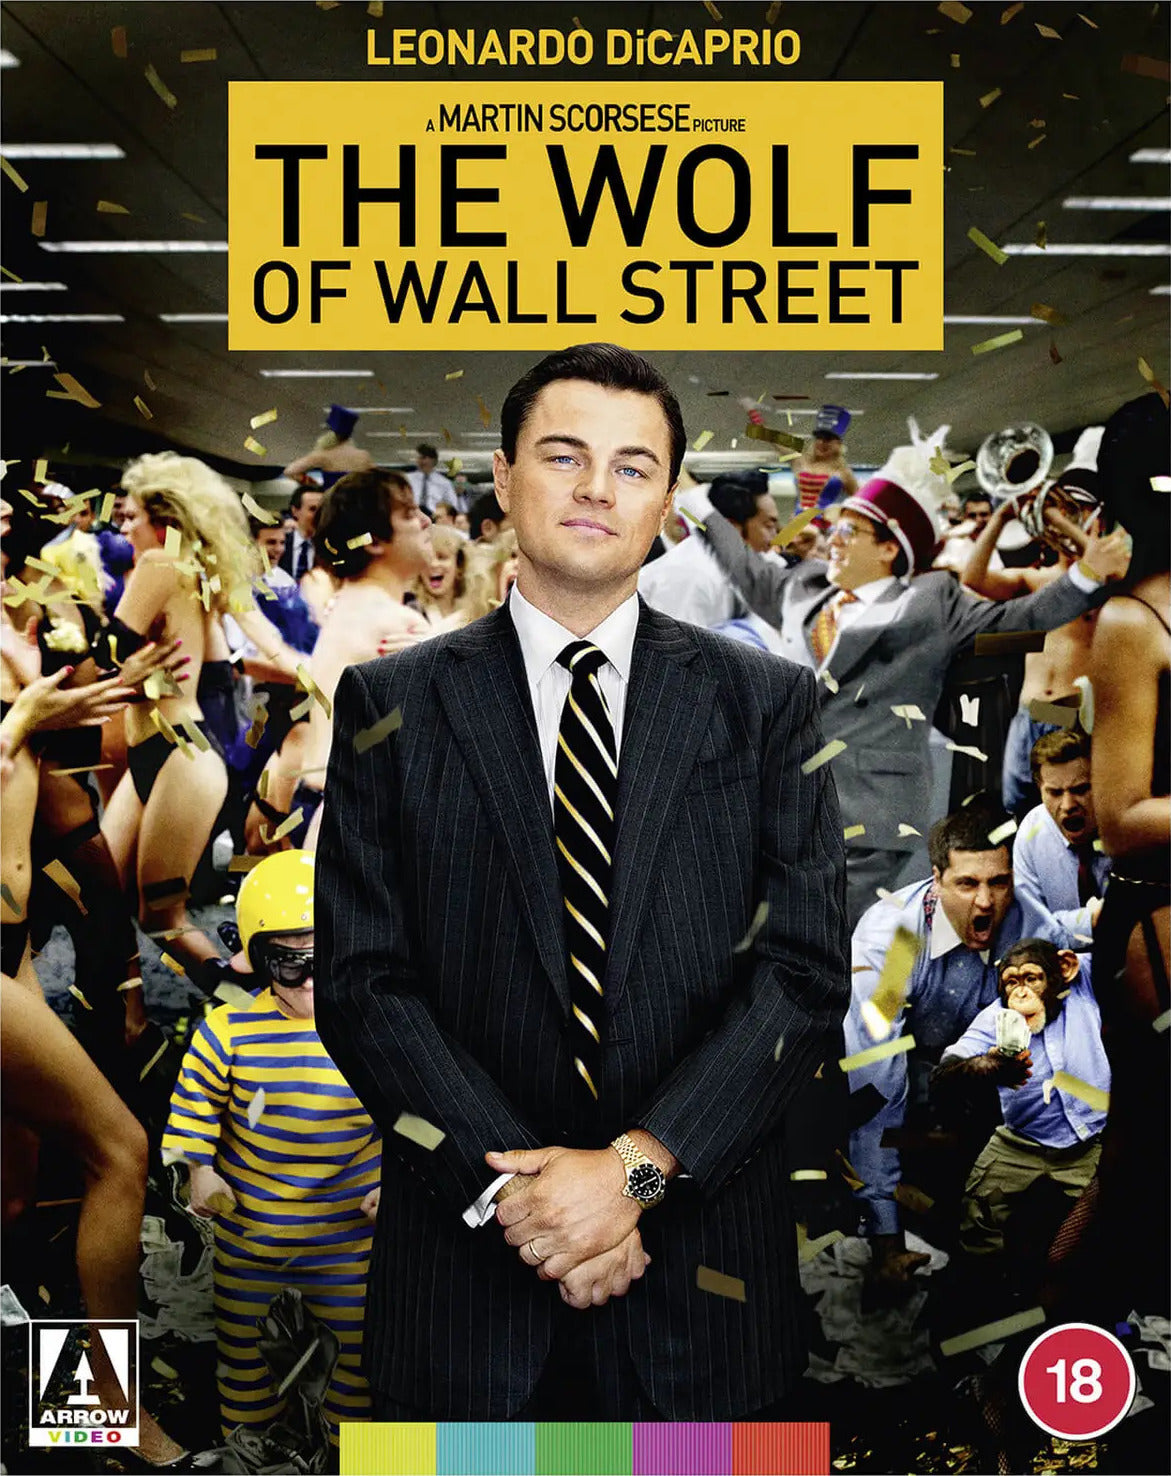 THE WOLF OF WALL STREET (REGION B IMPORT - LIMITED EDITION) BLU-RAY